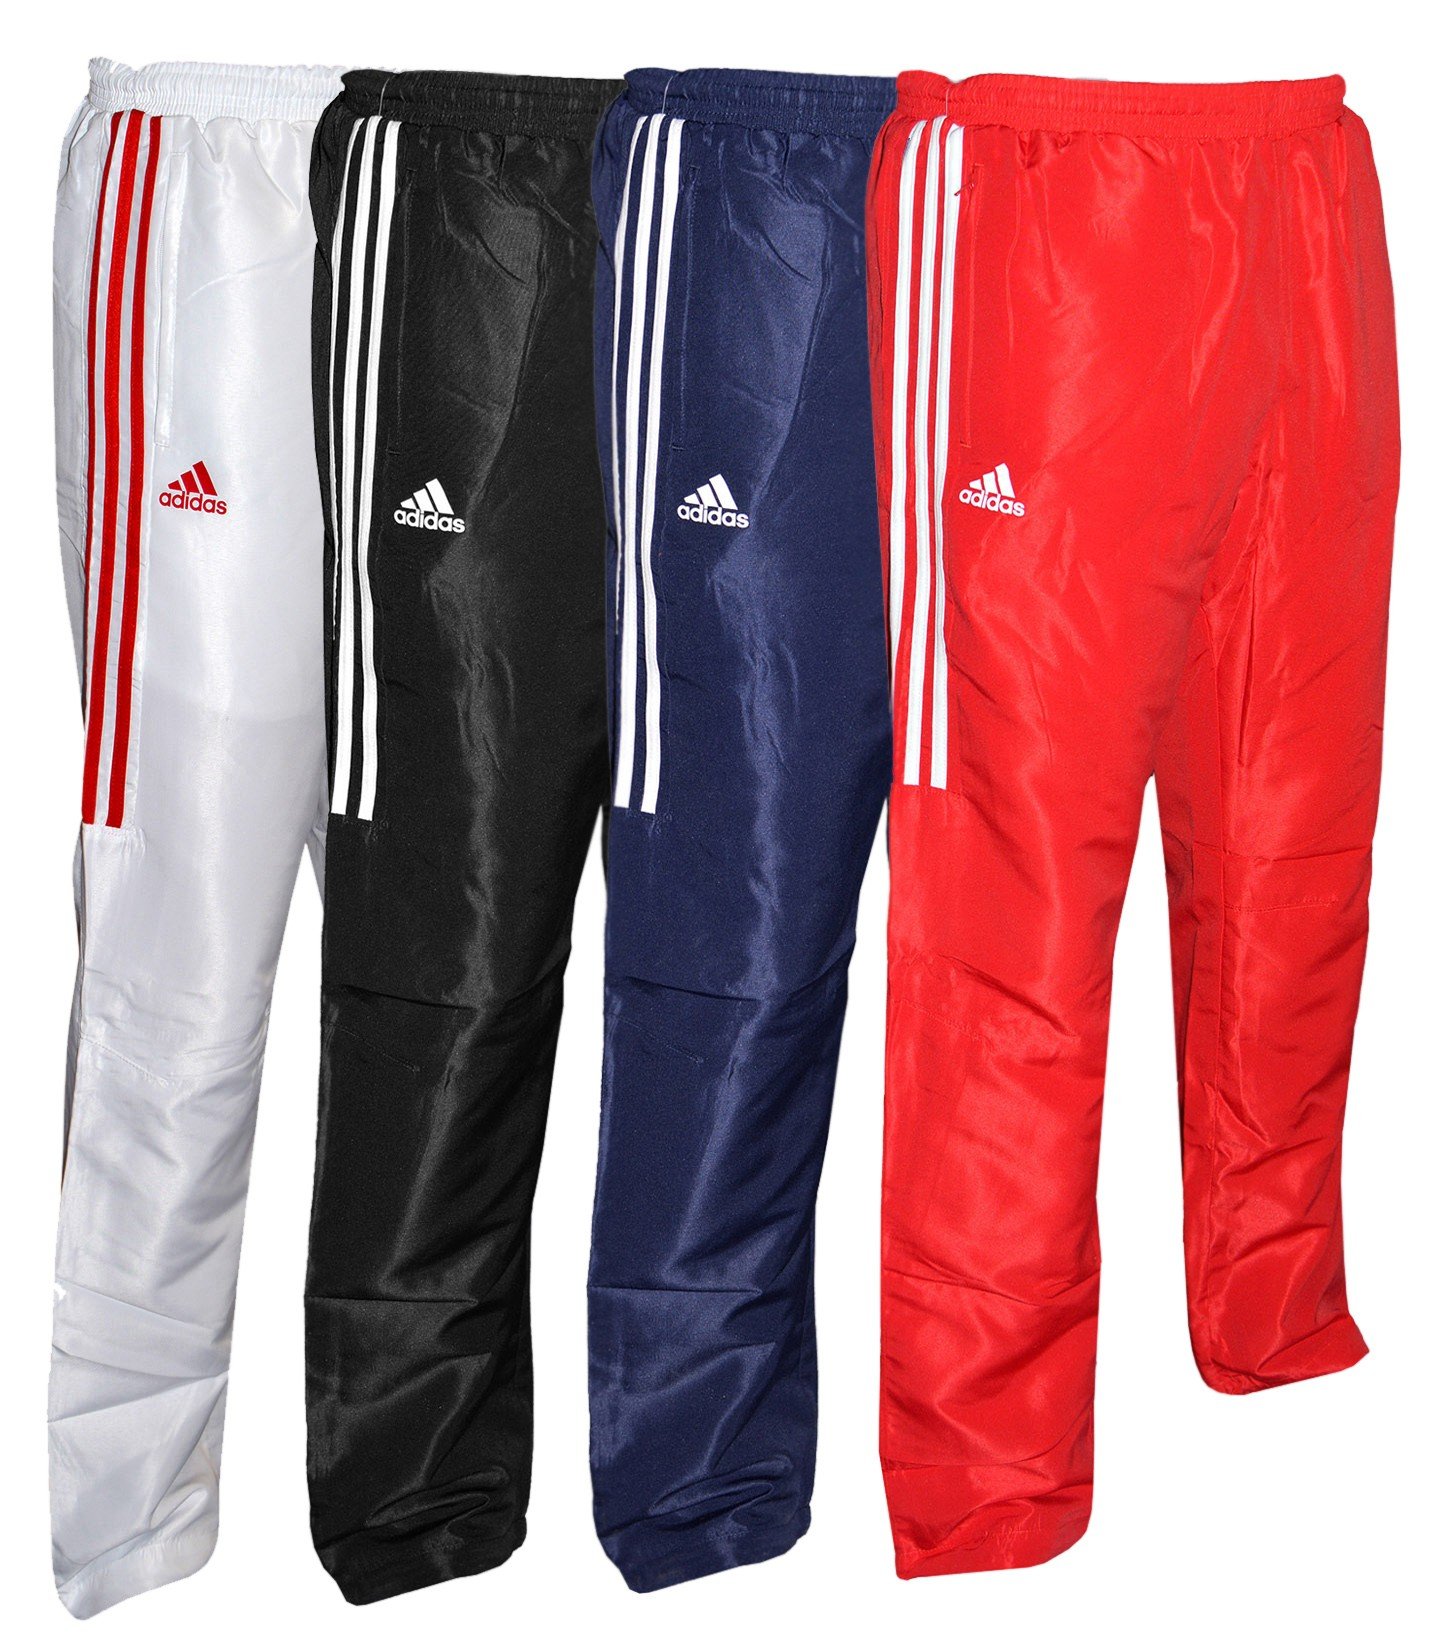 Top 4 Best Adidas Tracksuits To Wear To 